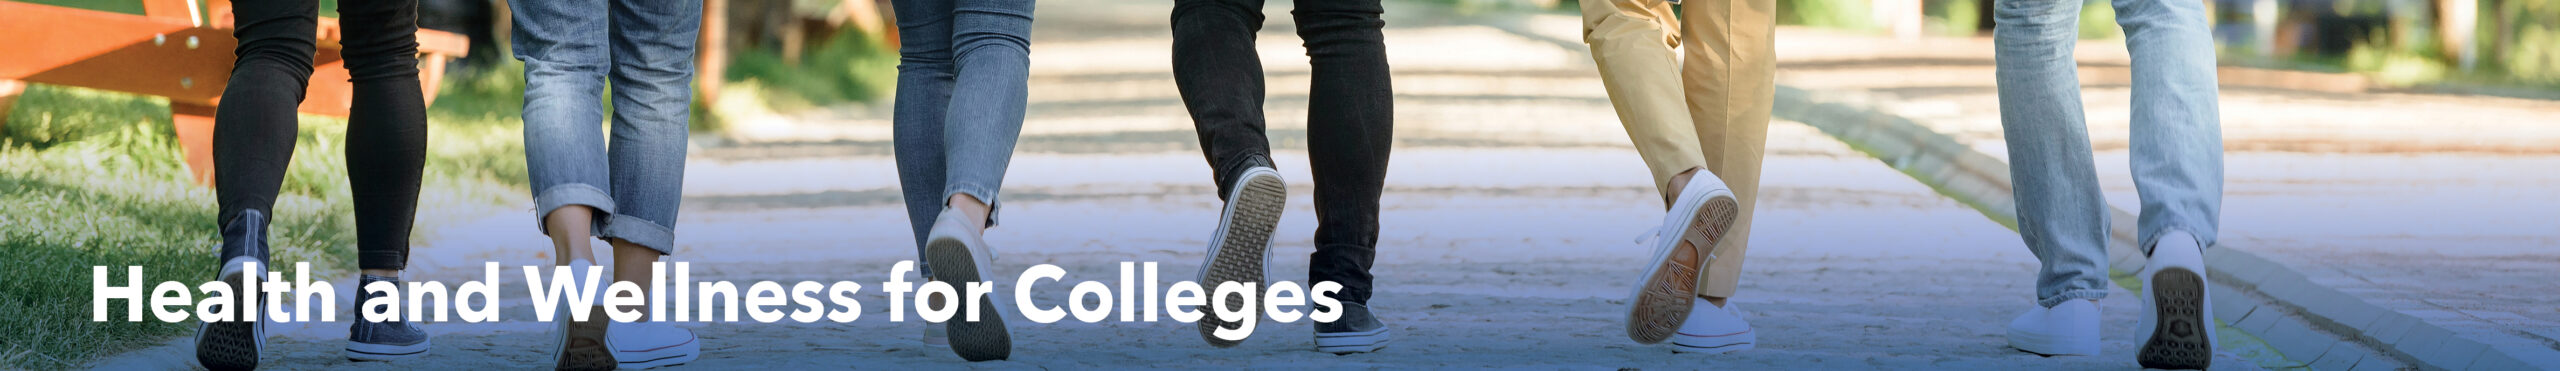 Health and Wellness for Colleges